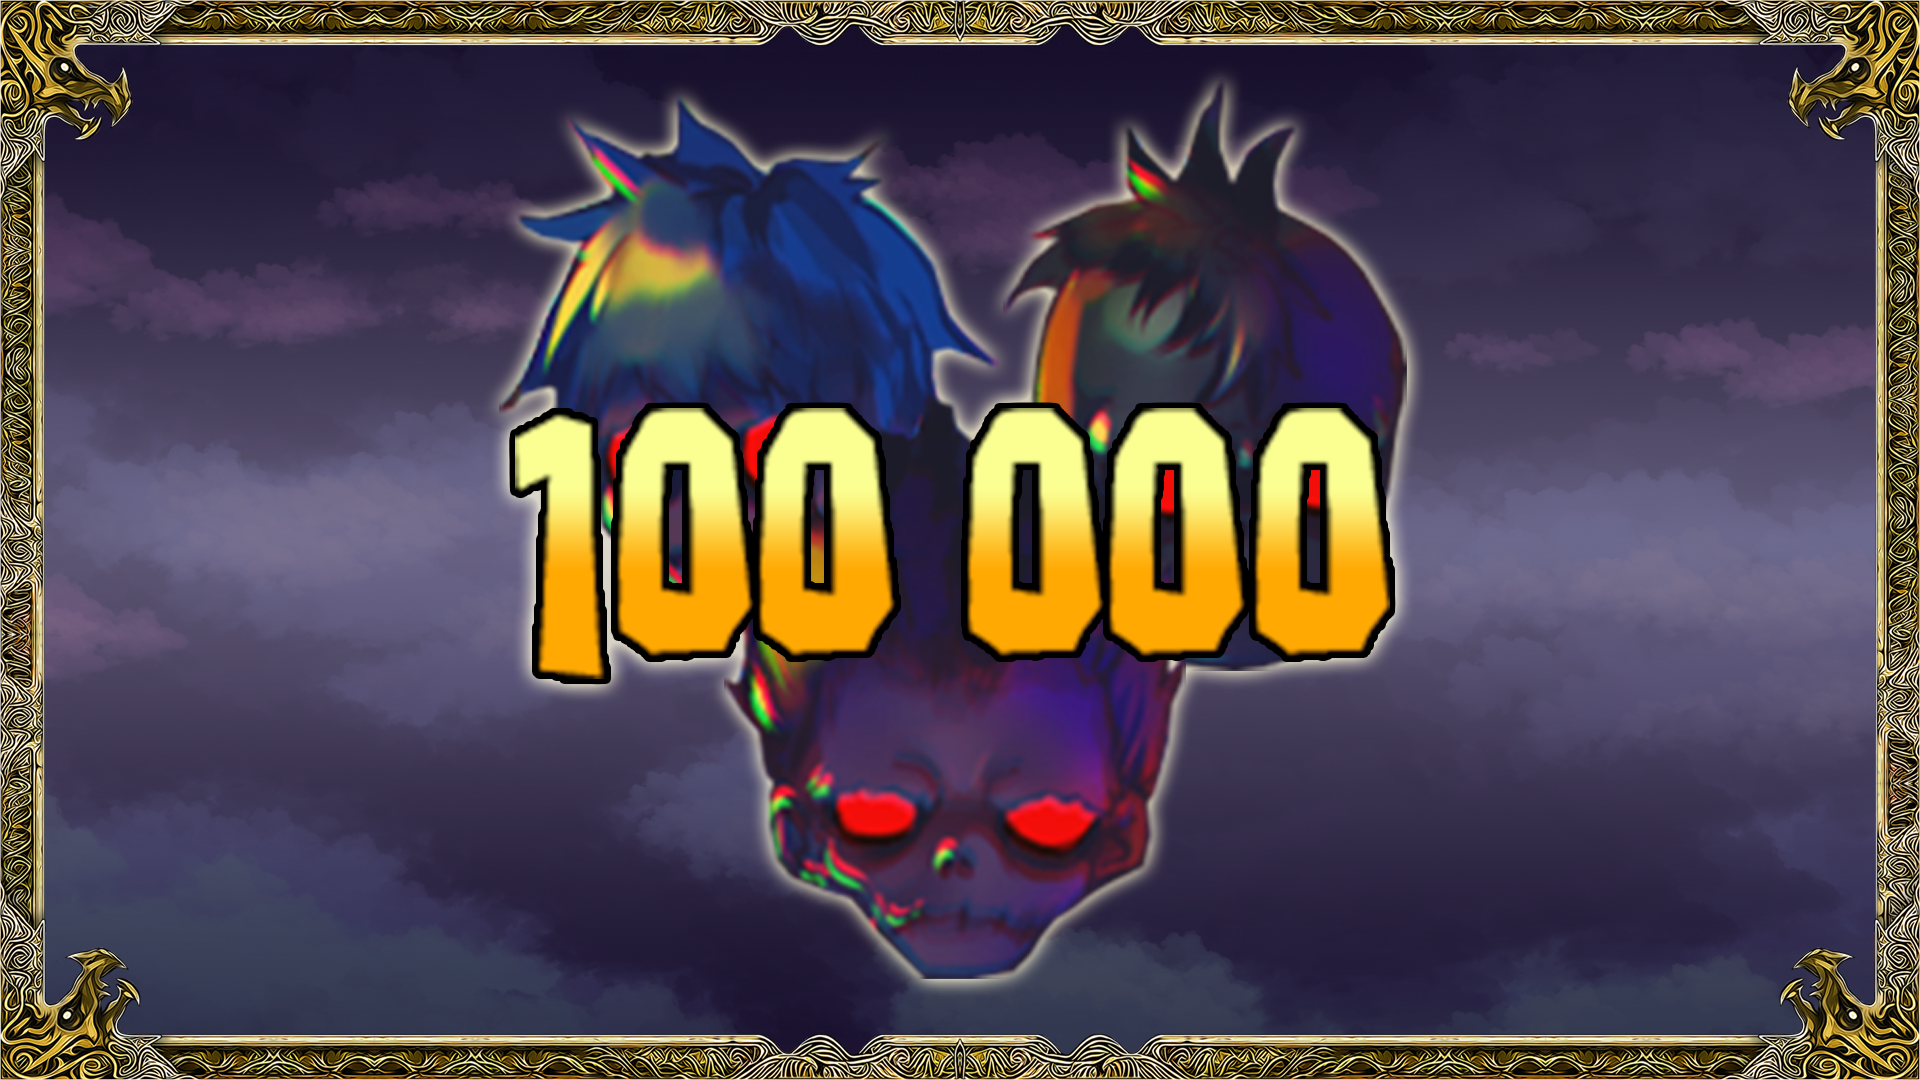 Icon for 100000 enemies defeated